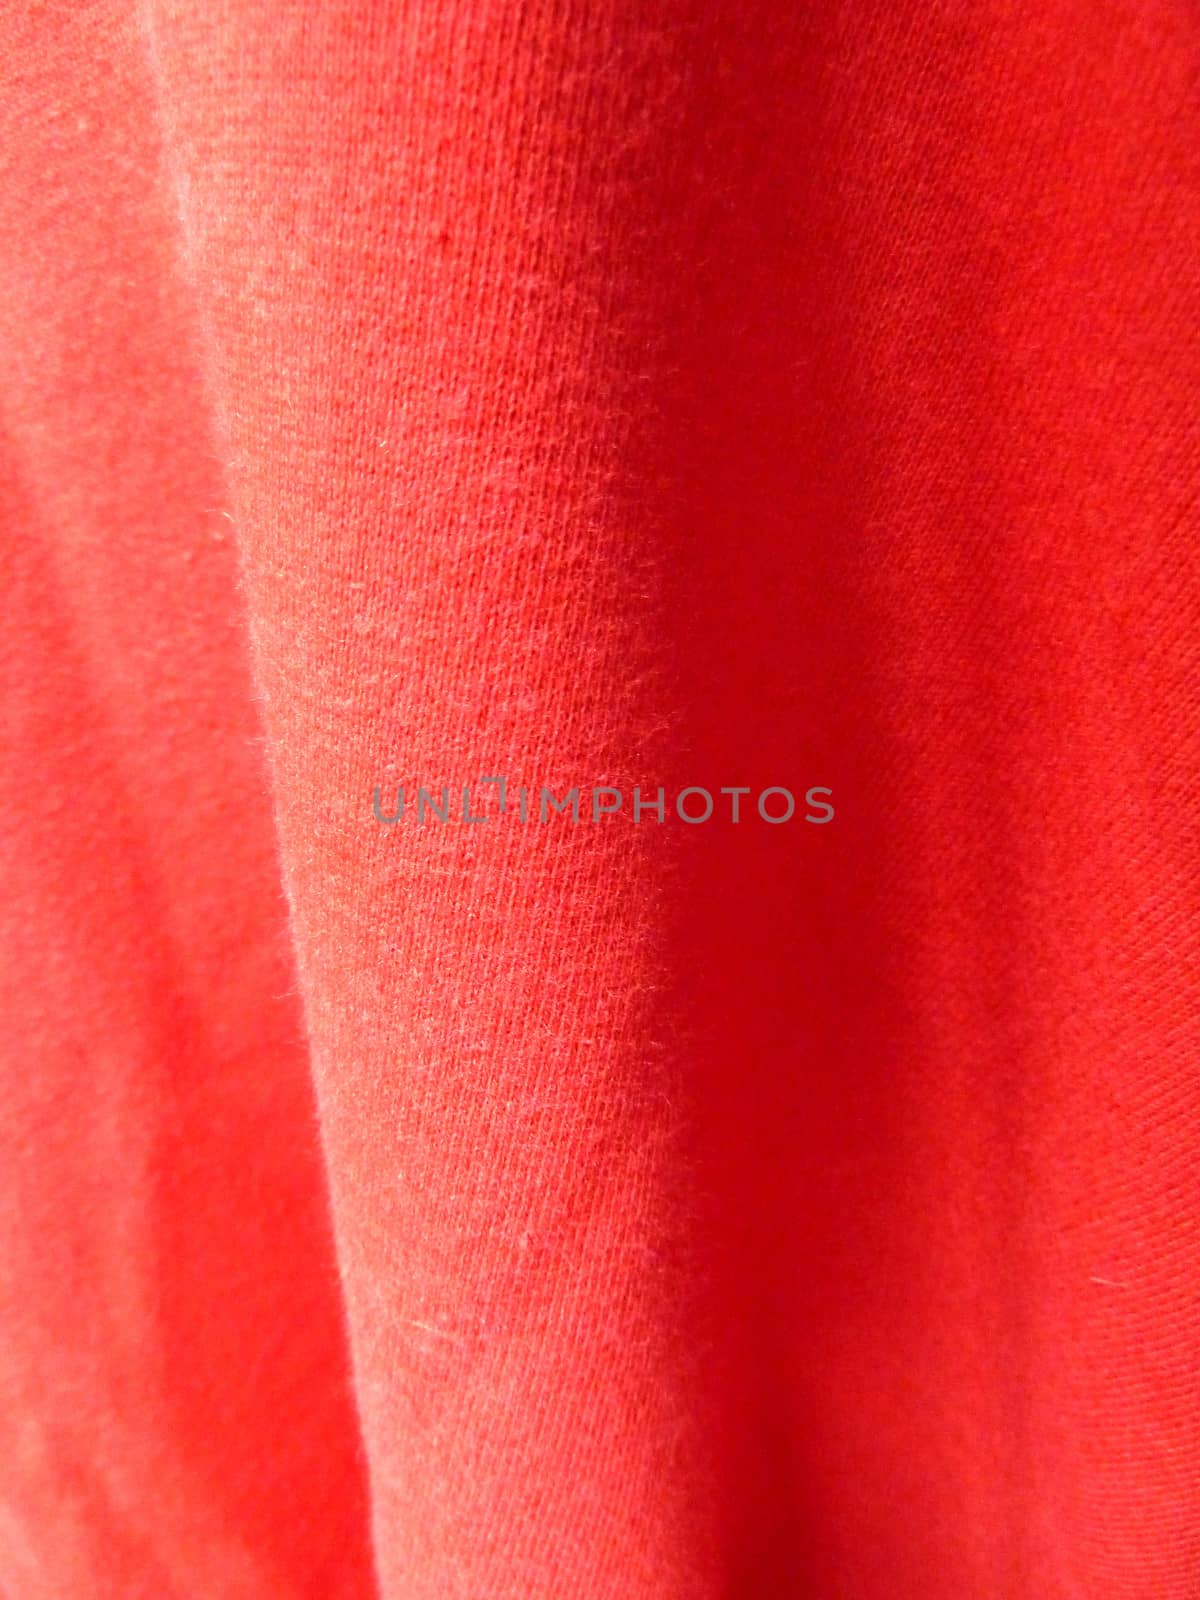 Red fabric by gazmoi